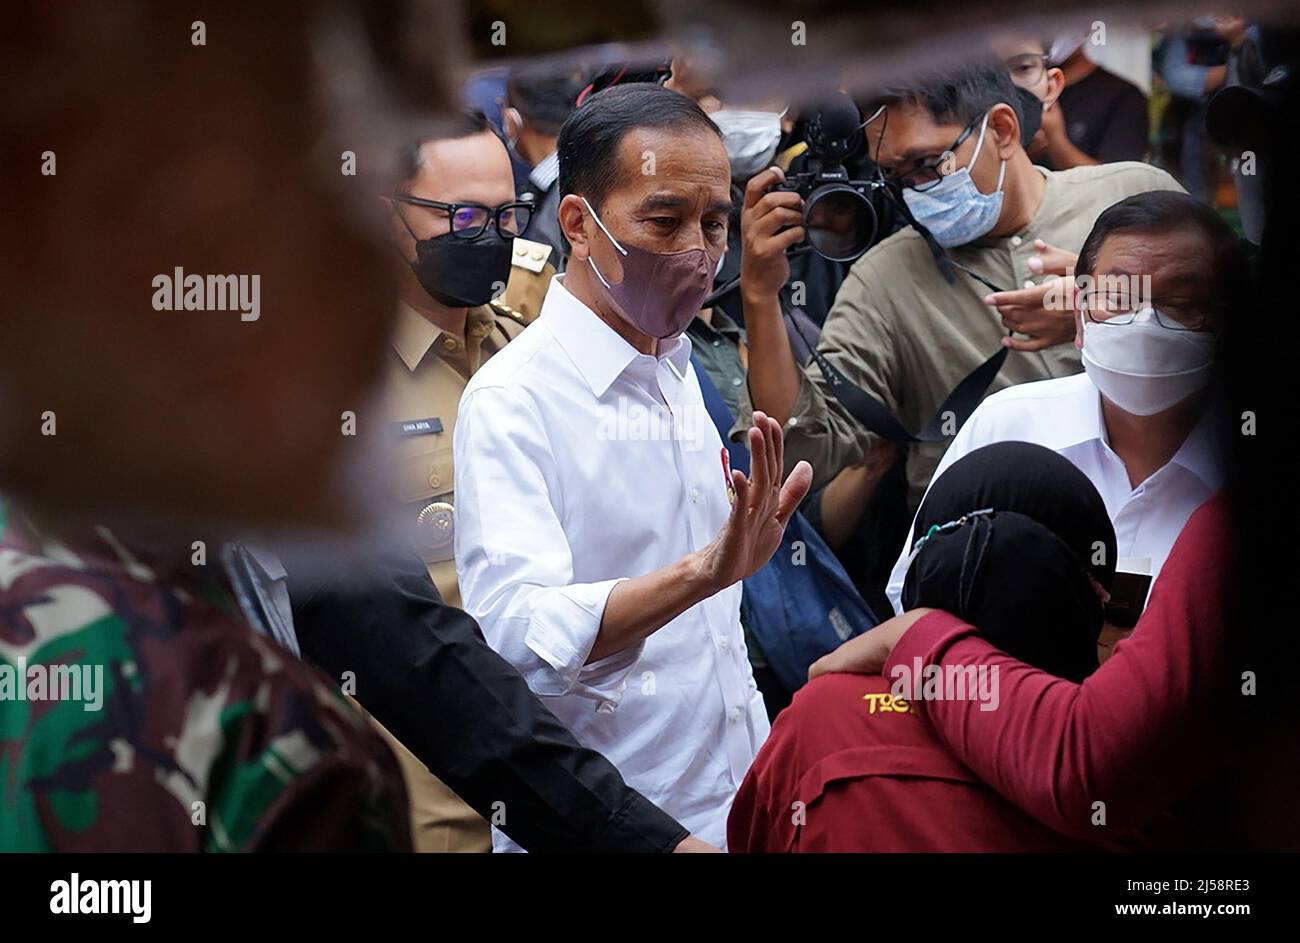 Bogor, Indonesia. 21st Apr, 2022. Indonesian President Joko Widodo (c) during distribution of Cooking Oil Direct Cash Assistance (BLT) for residents at a traditional market In Bogor, West Java, Indonesia on April 21, 2022. The President handed over BLT Cooking Oil of Rp300,000 to the participants of the Family Hope Program (PKH), street vendors, and market traders. In addition, President Jokowi also distributed Working Capital Assistance of Rp1.2 million for additional working capital or business capital. (Photo by Ryan Maulana/INA Photo Agency/Sipa USA) Credit: Sipa USA/Alamy Live News Stock Photo